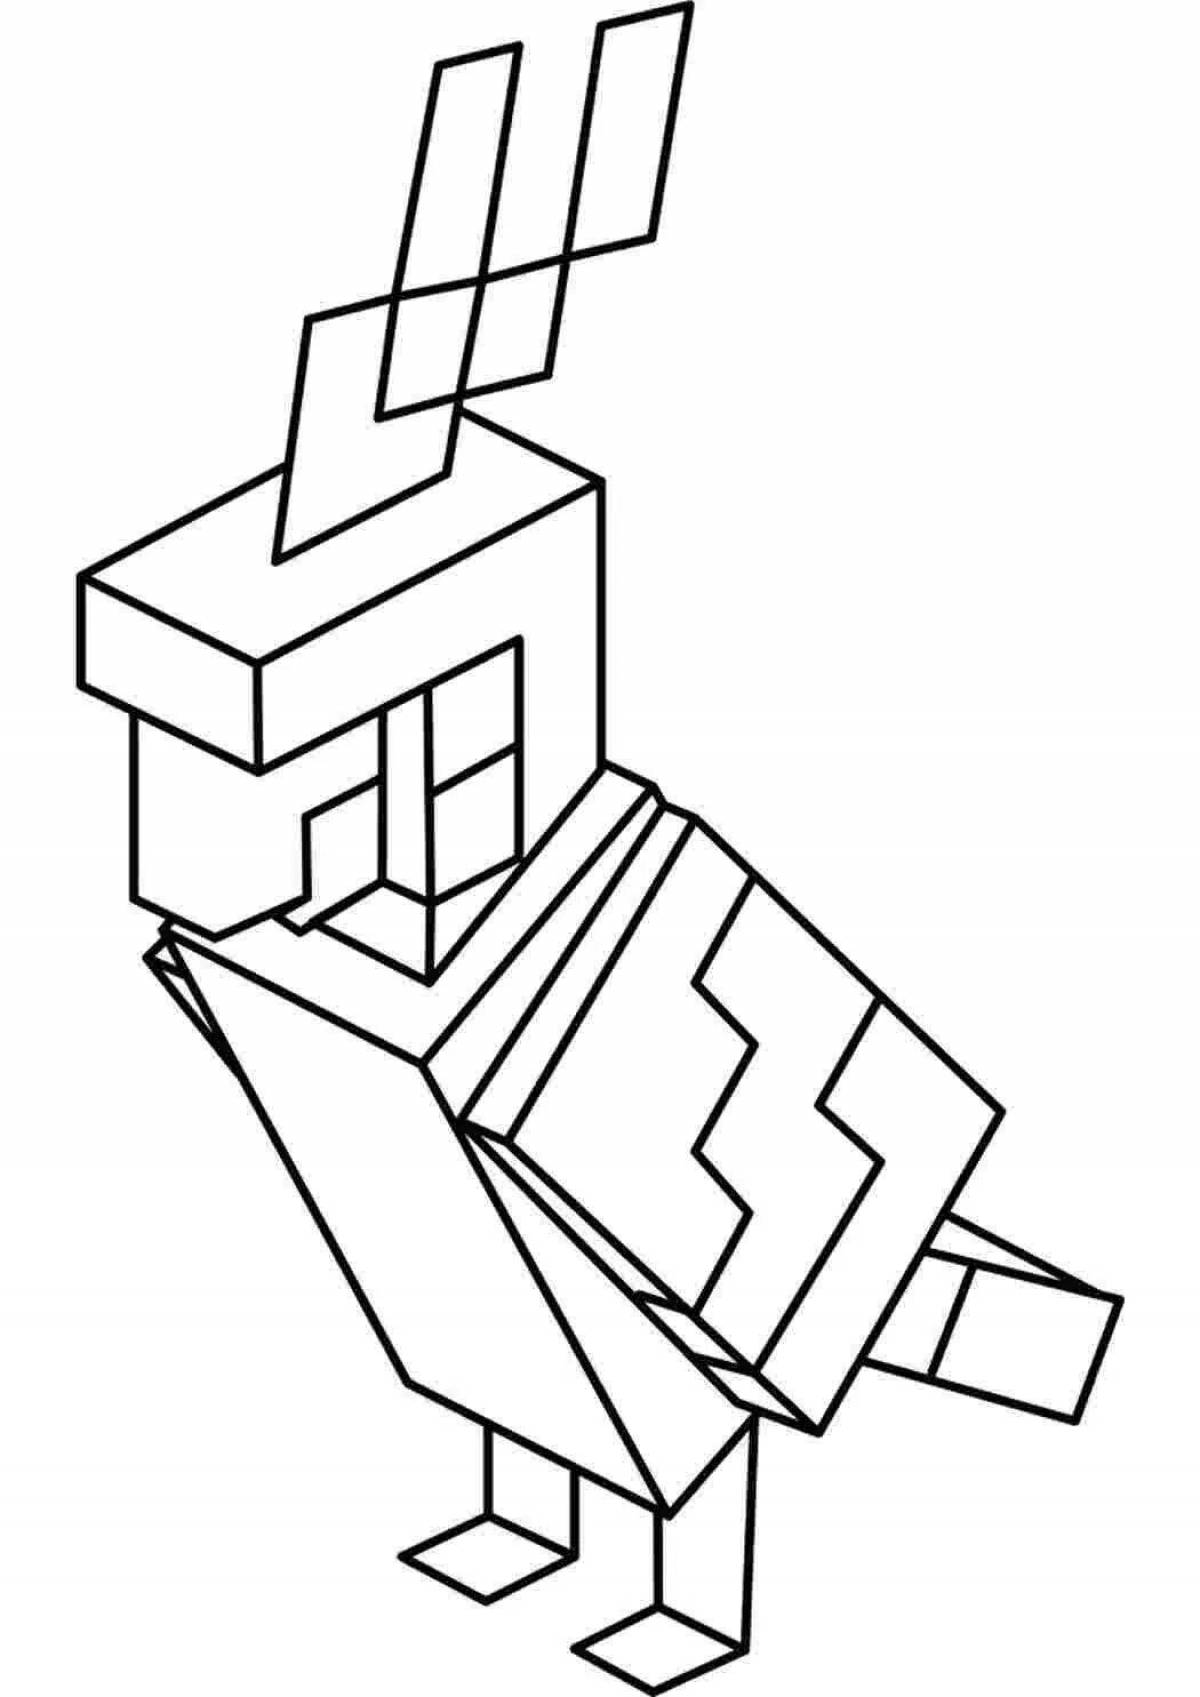 A fun minecraft pig coloring page